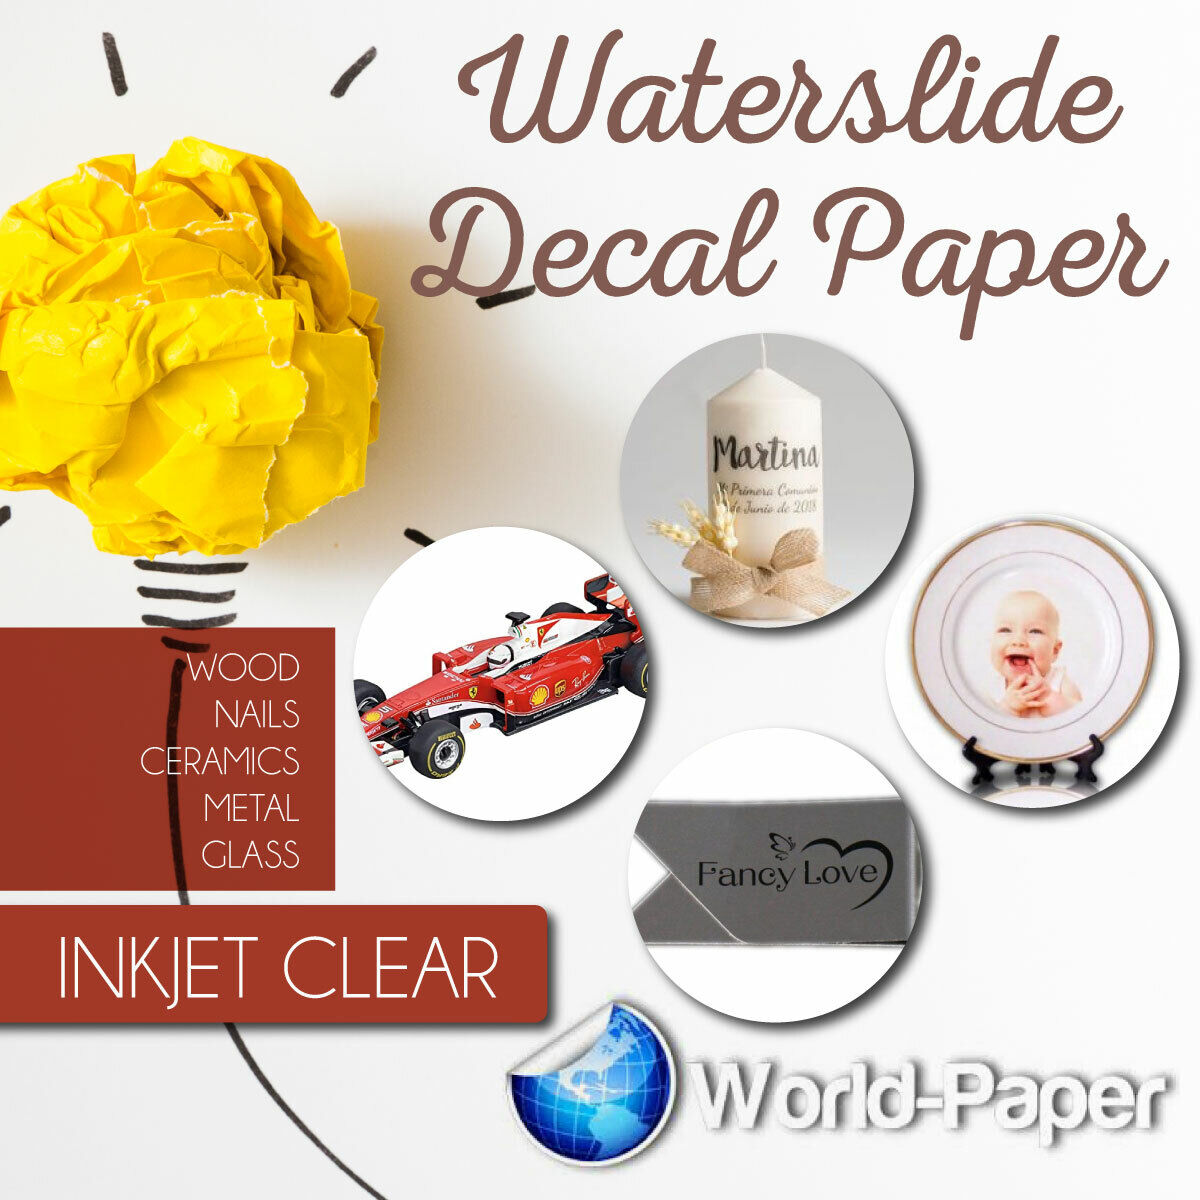 INKJET CLEAR  Waterslide decal  paper -10 sheets 8.5 x 11 made in usa #1